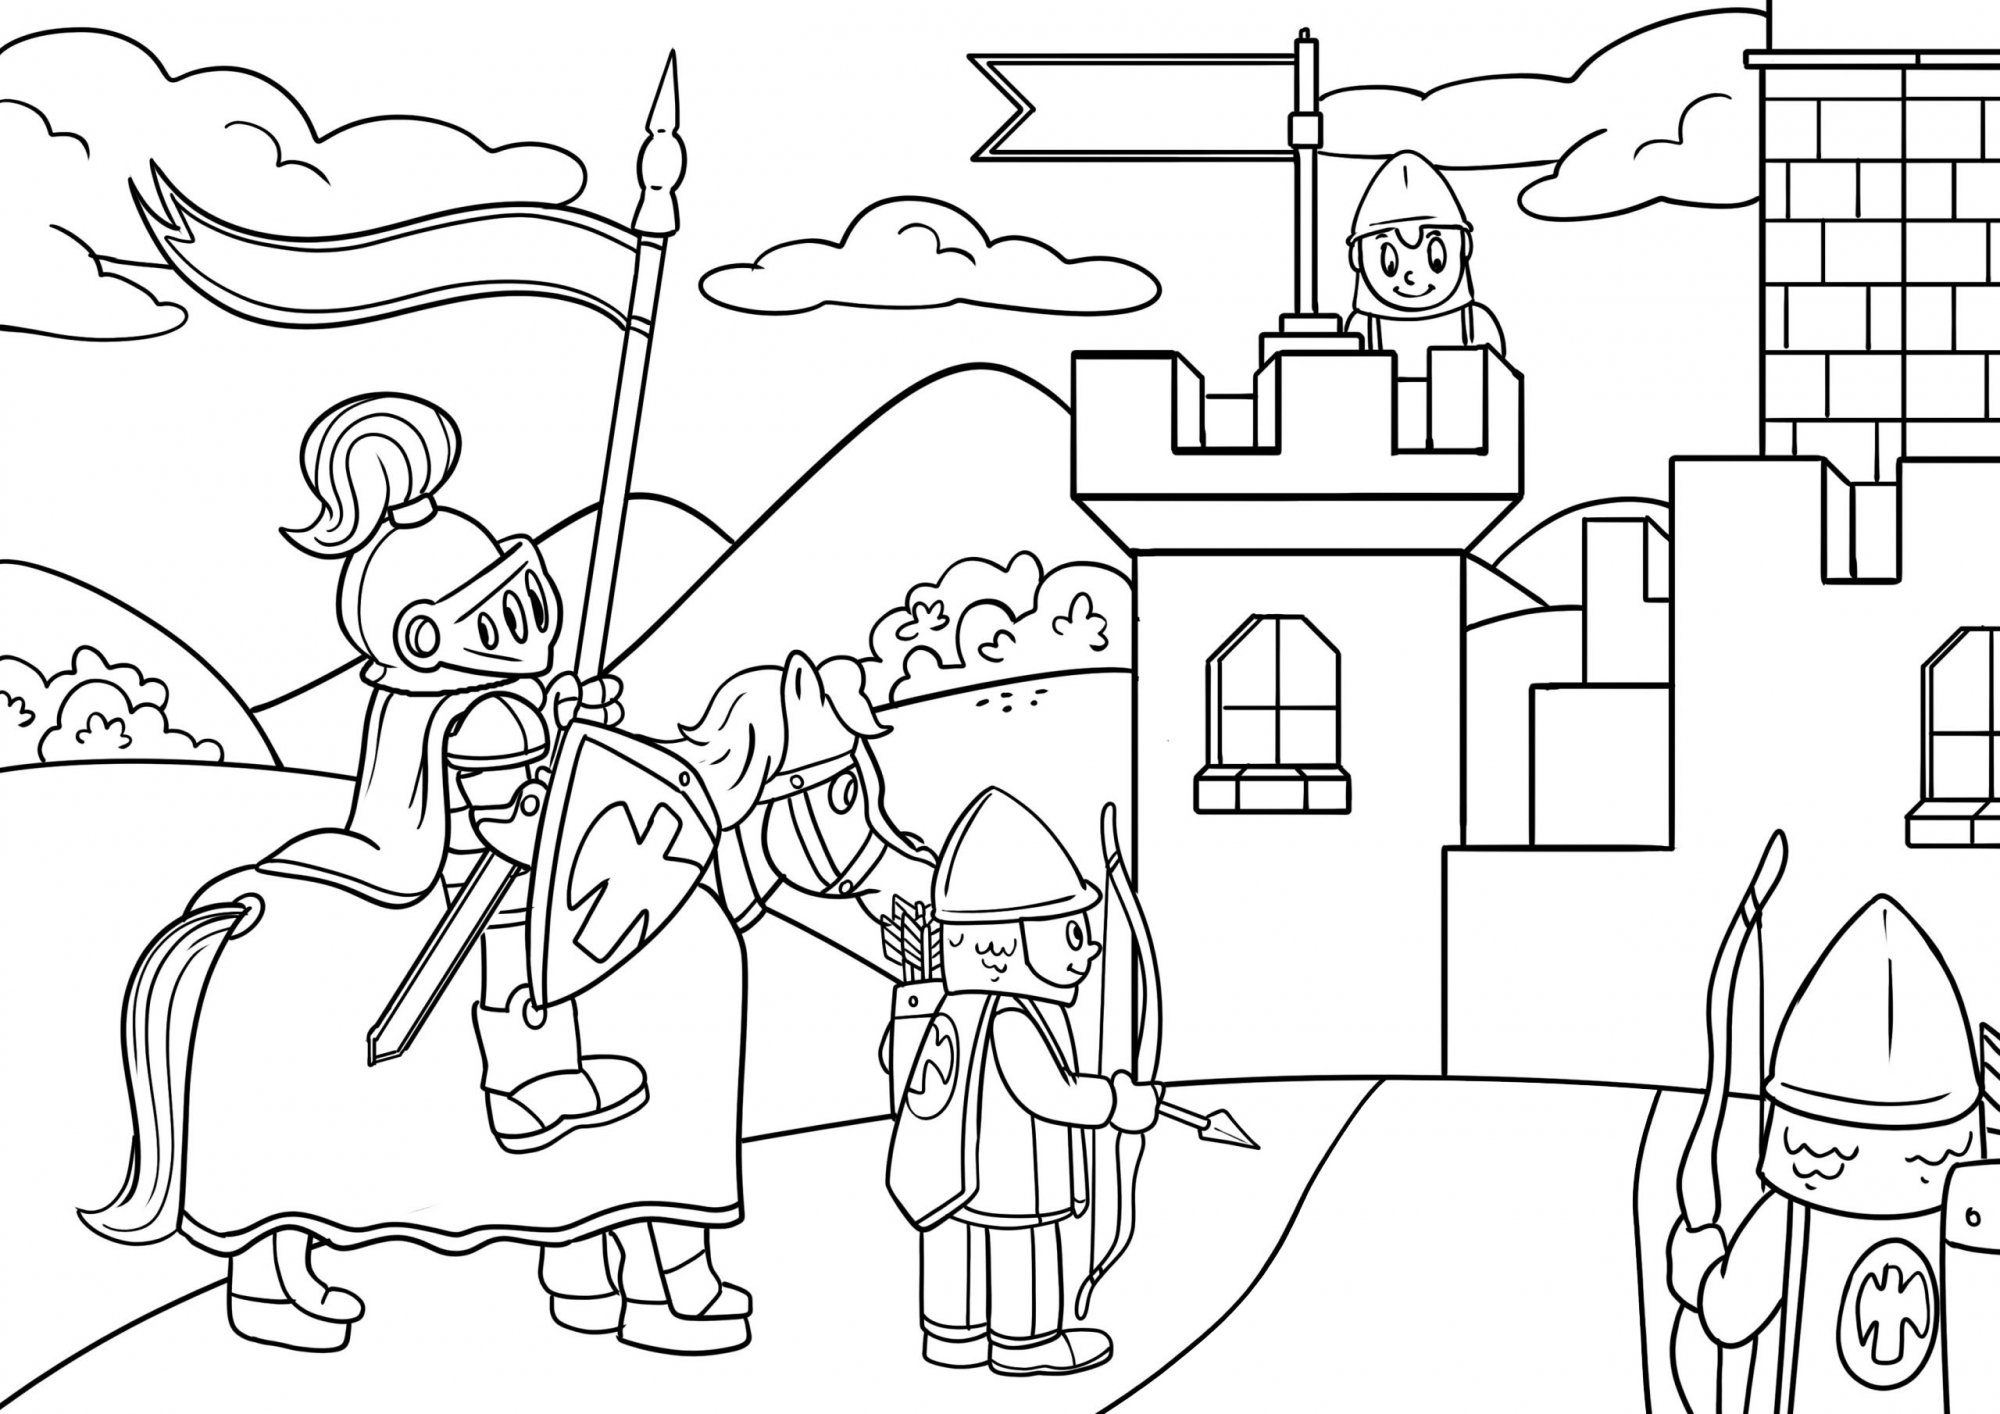 Exalted knight mike coloring page